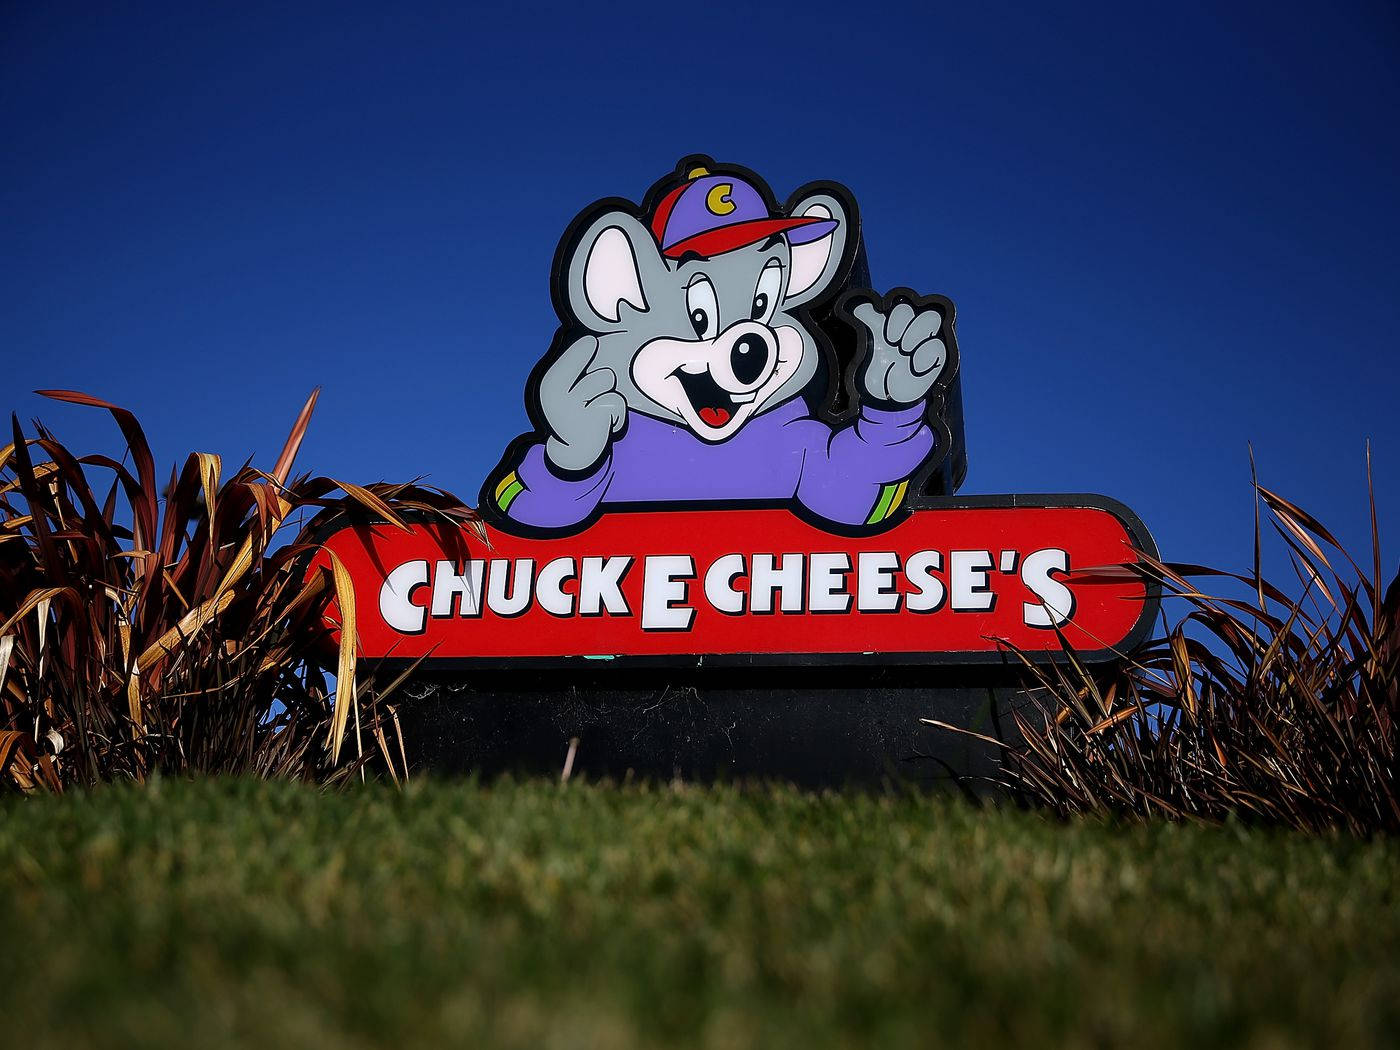 Chuck E Cheese Restaurant Signage Background